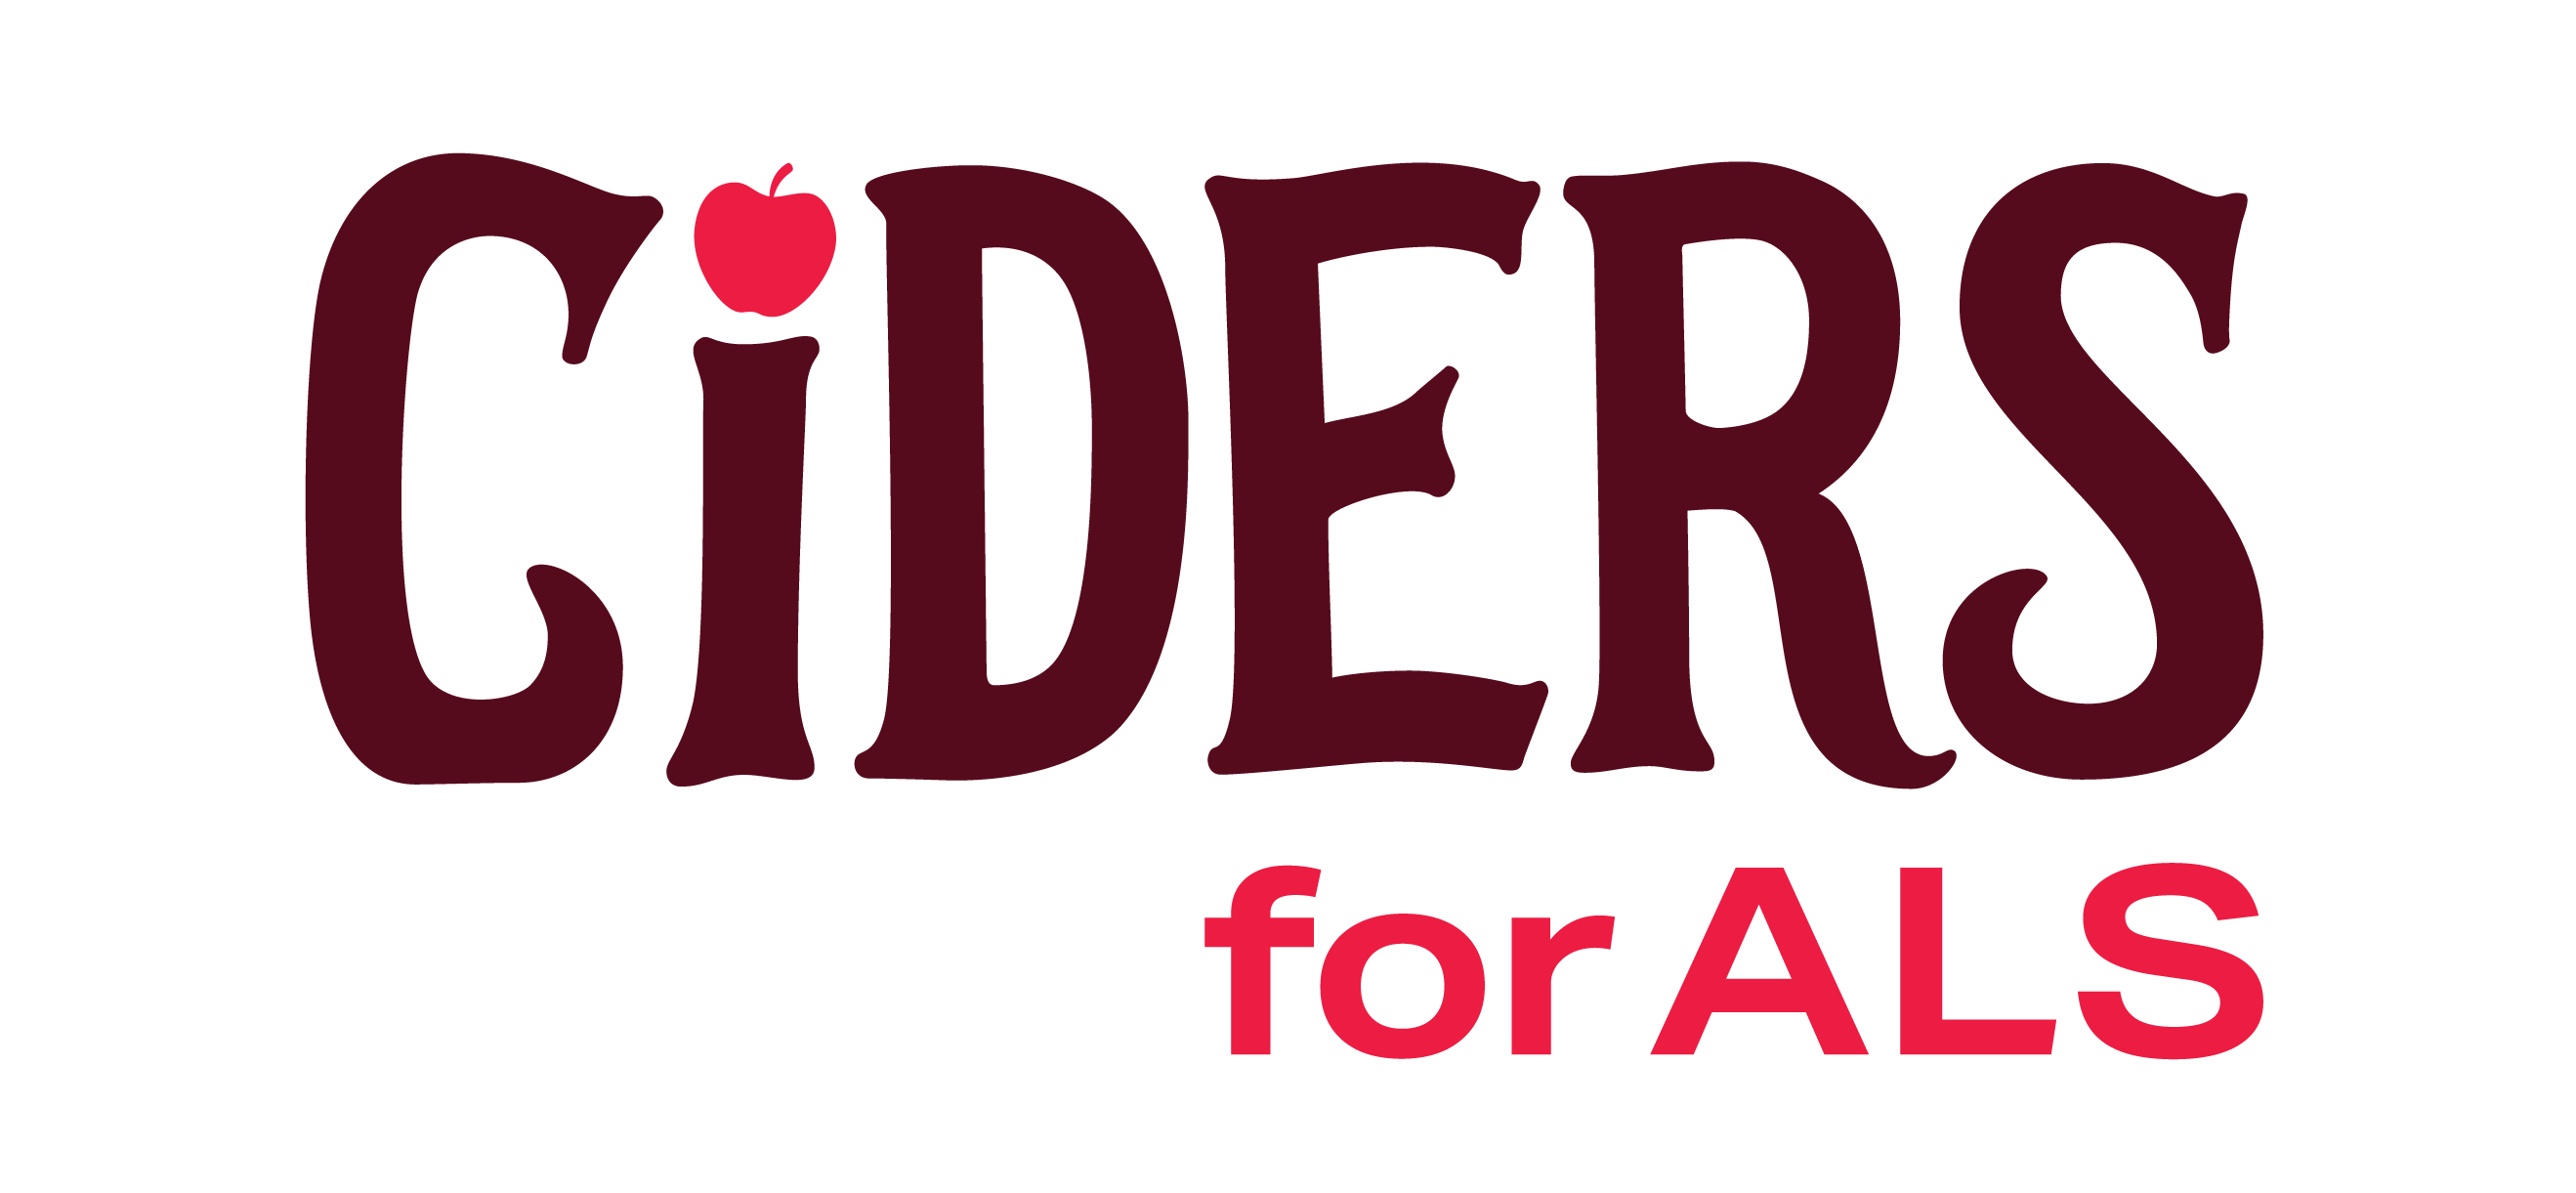 Ciders for ALS